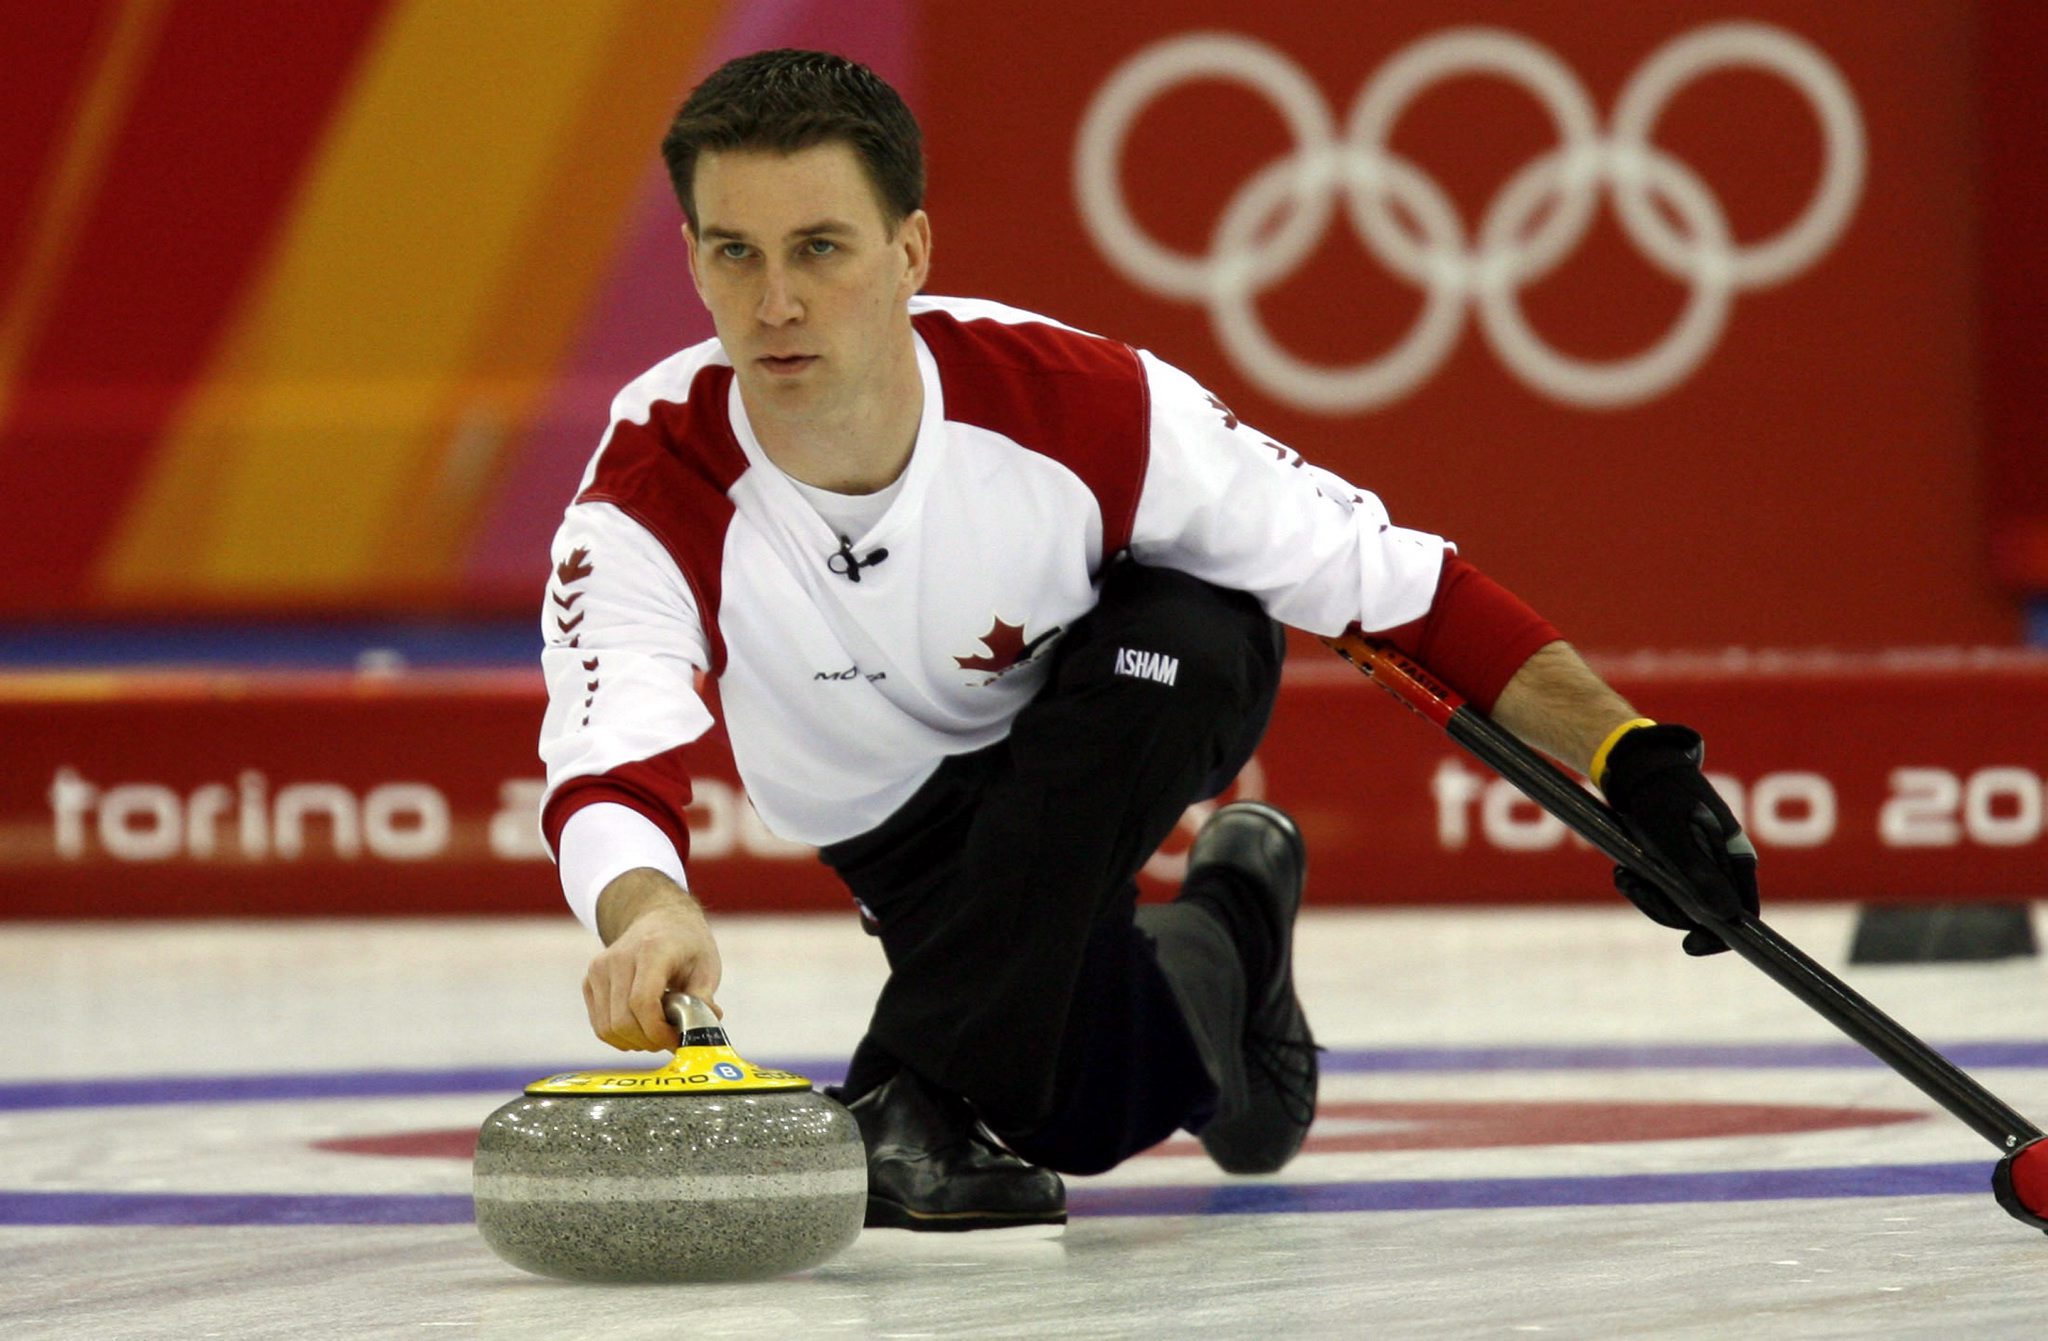 Brad Josh, a Canadian player, throws a stone in the final at the Turin Winter Olympics curling final in Pinerolo on February 24, 2006. Canada won 10-4 and won a gold medal.  Photo: MTI/EPA/Valdrin Xhemaj